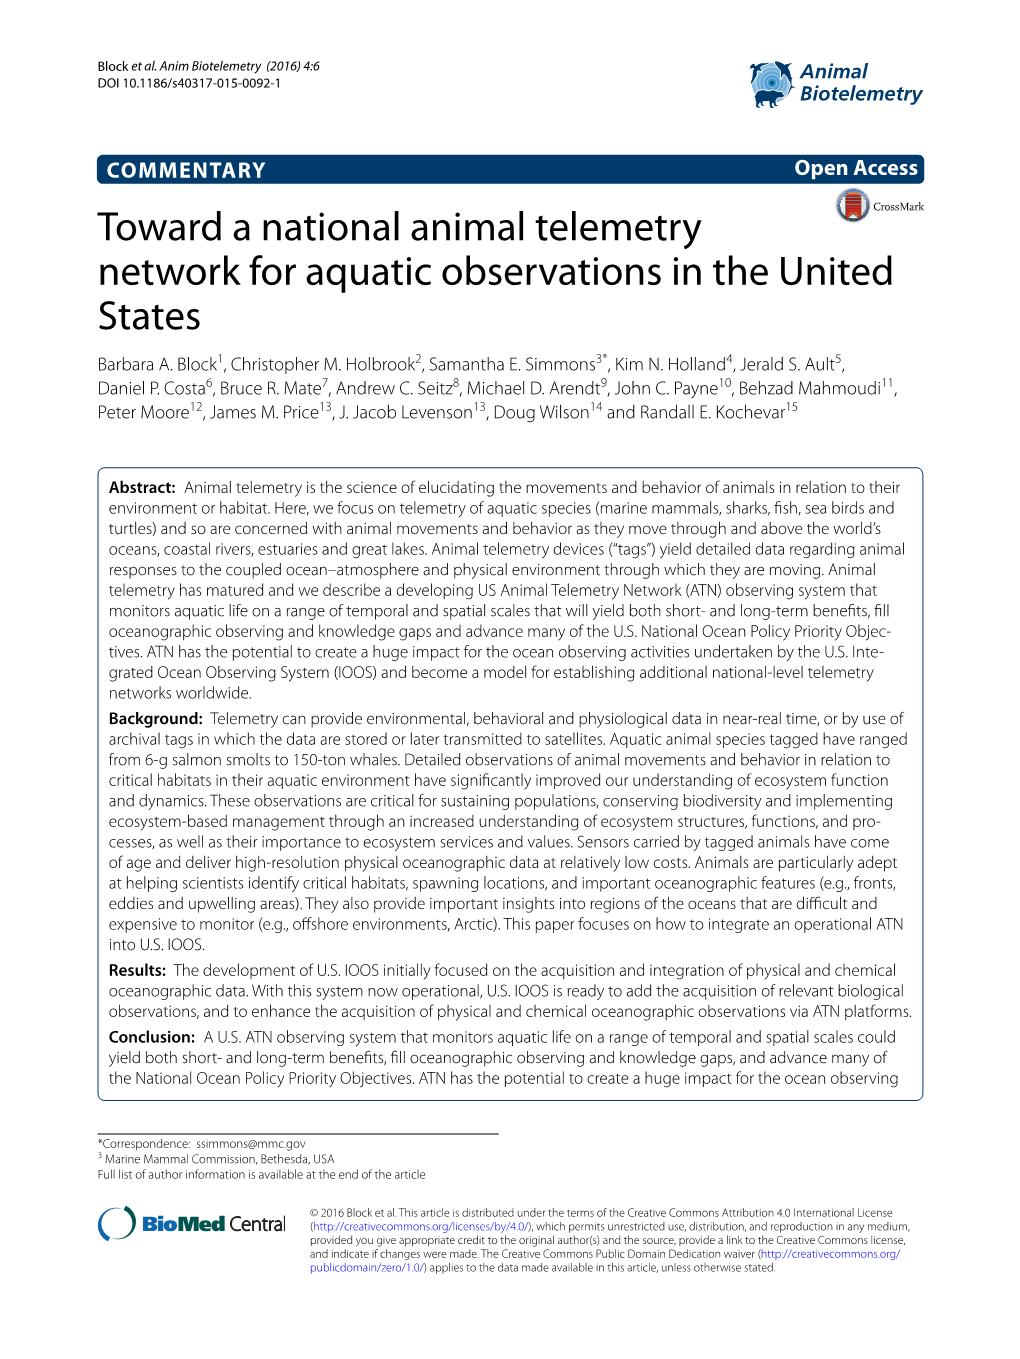 Toward a National Animal Telemetry Network for Aquatic Observations in the United States Barbara A